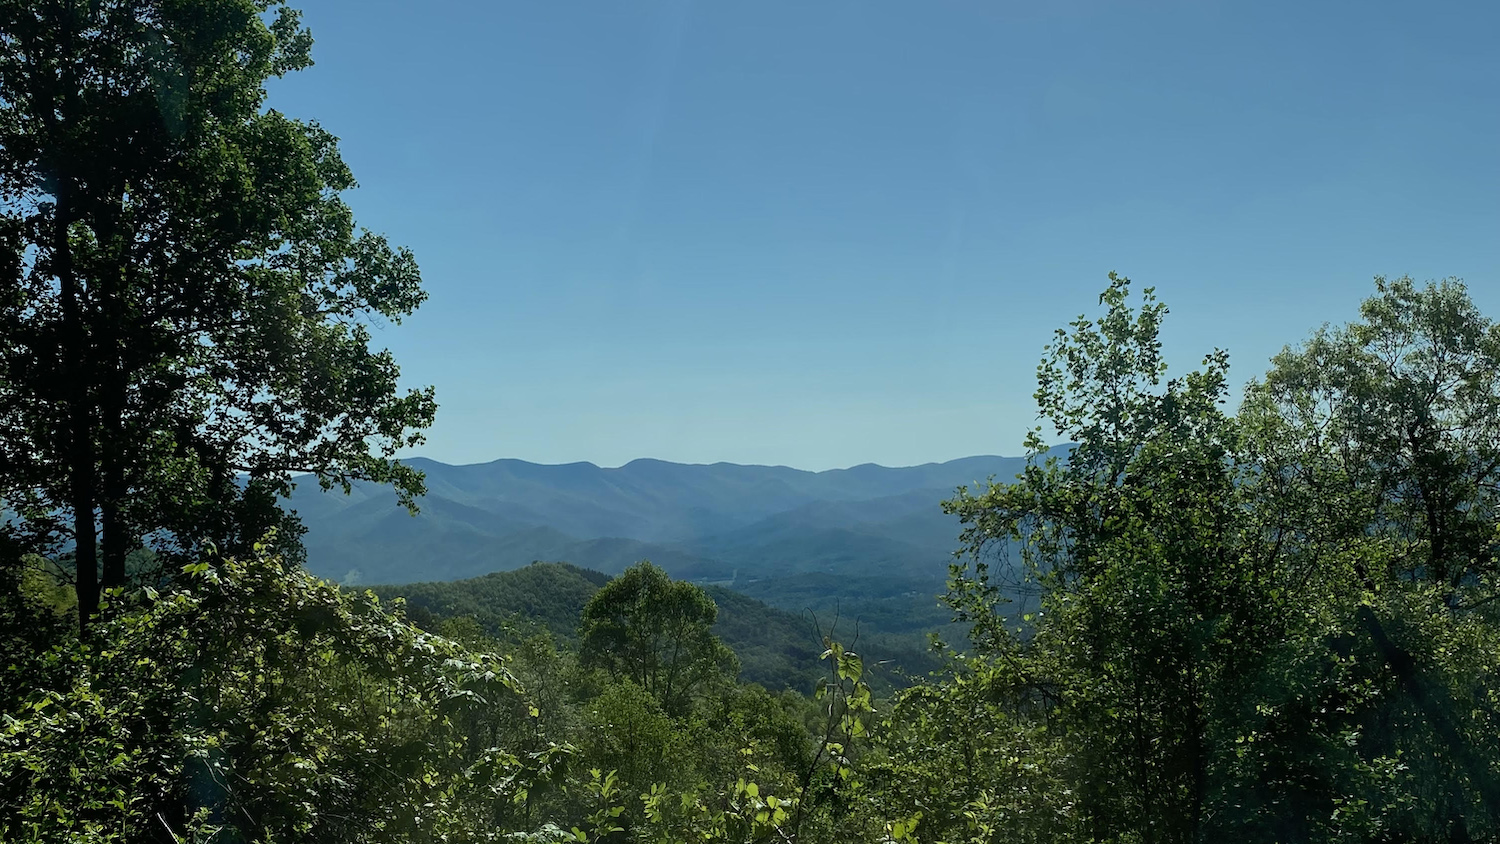 view of mountains against a blue sky with trees in the foreground